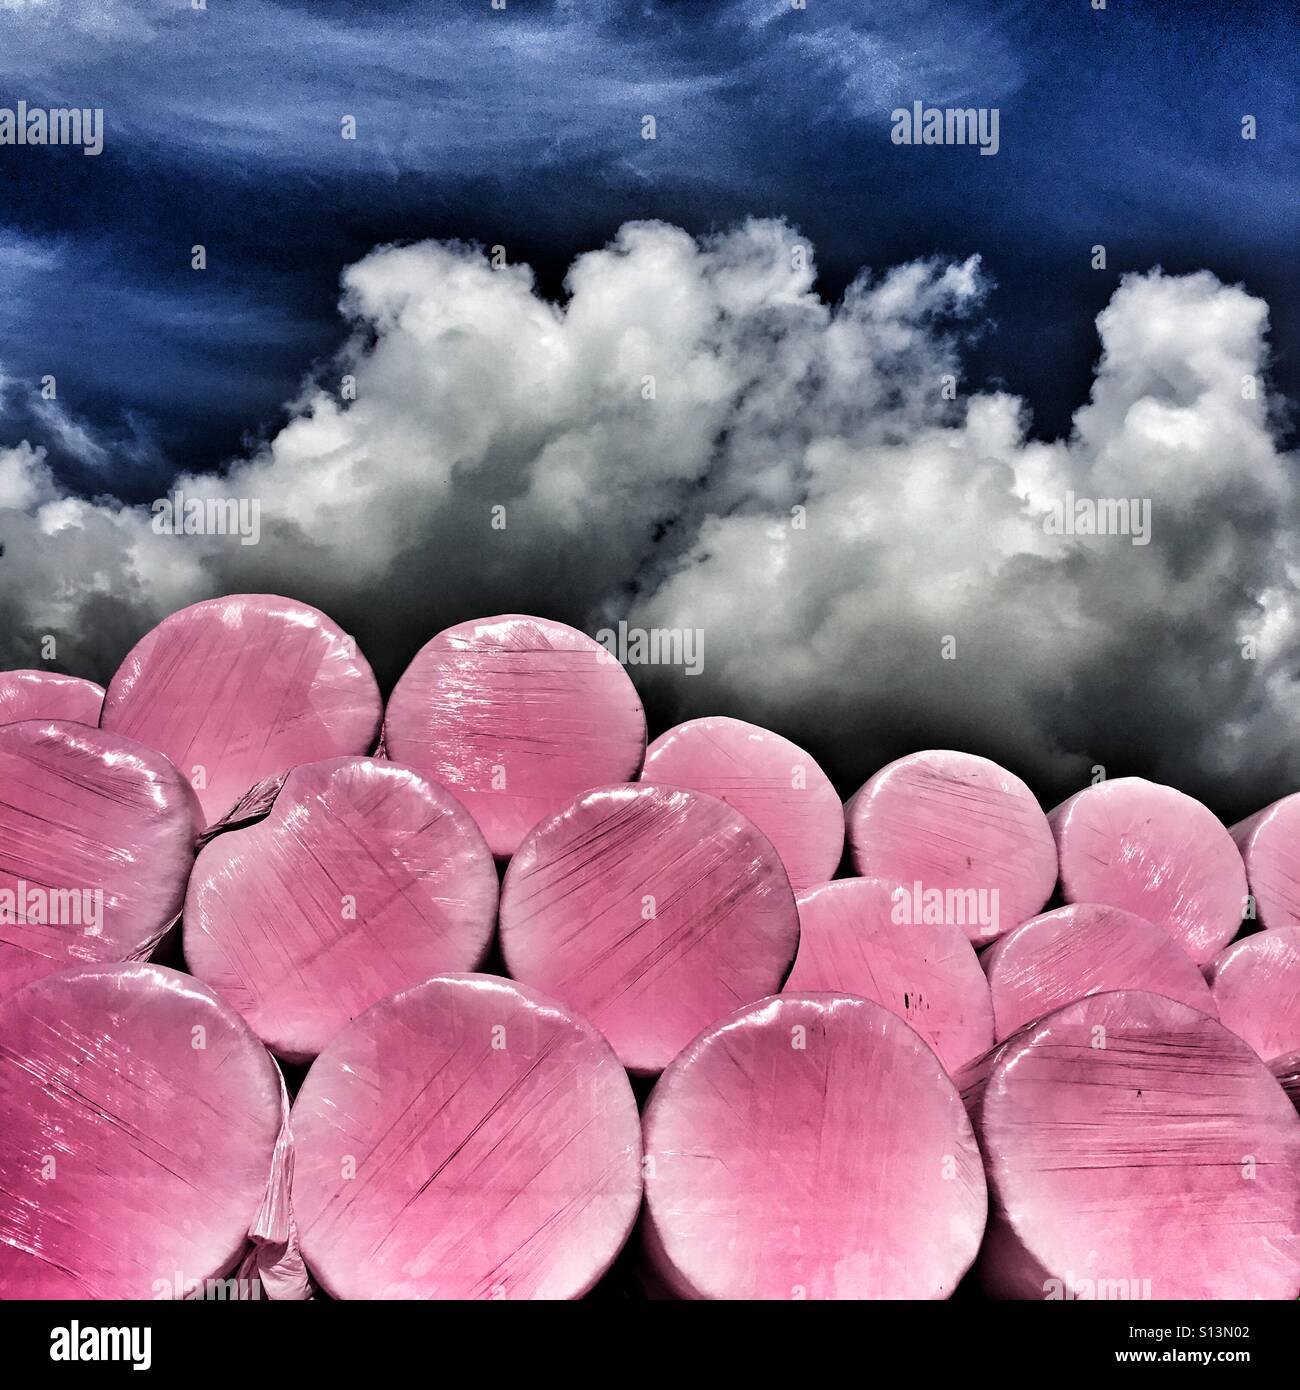 Hay bales wrapped in pink plastic against a dramatic sky Stock Photo